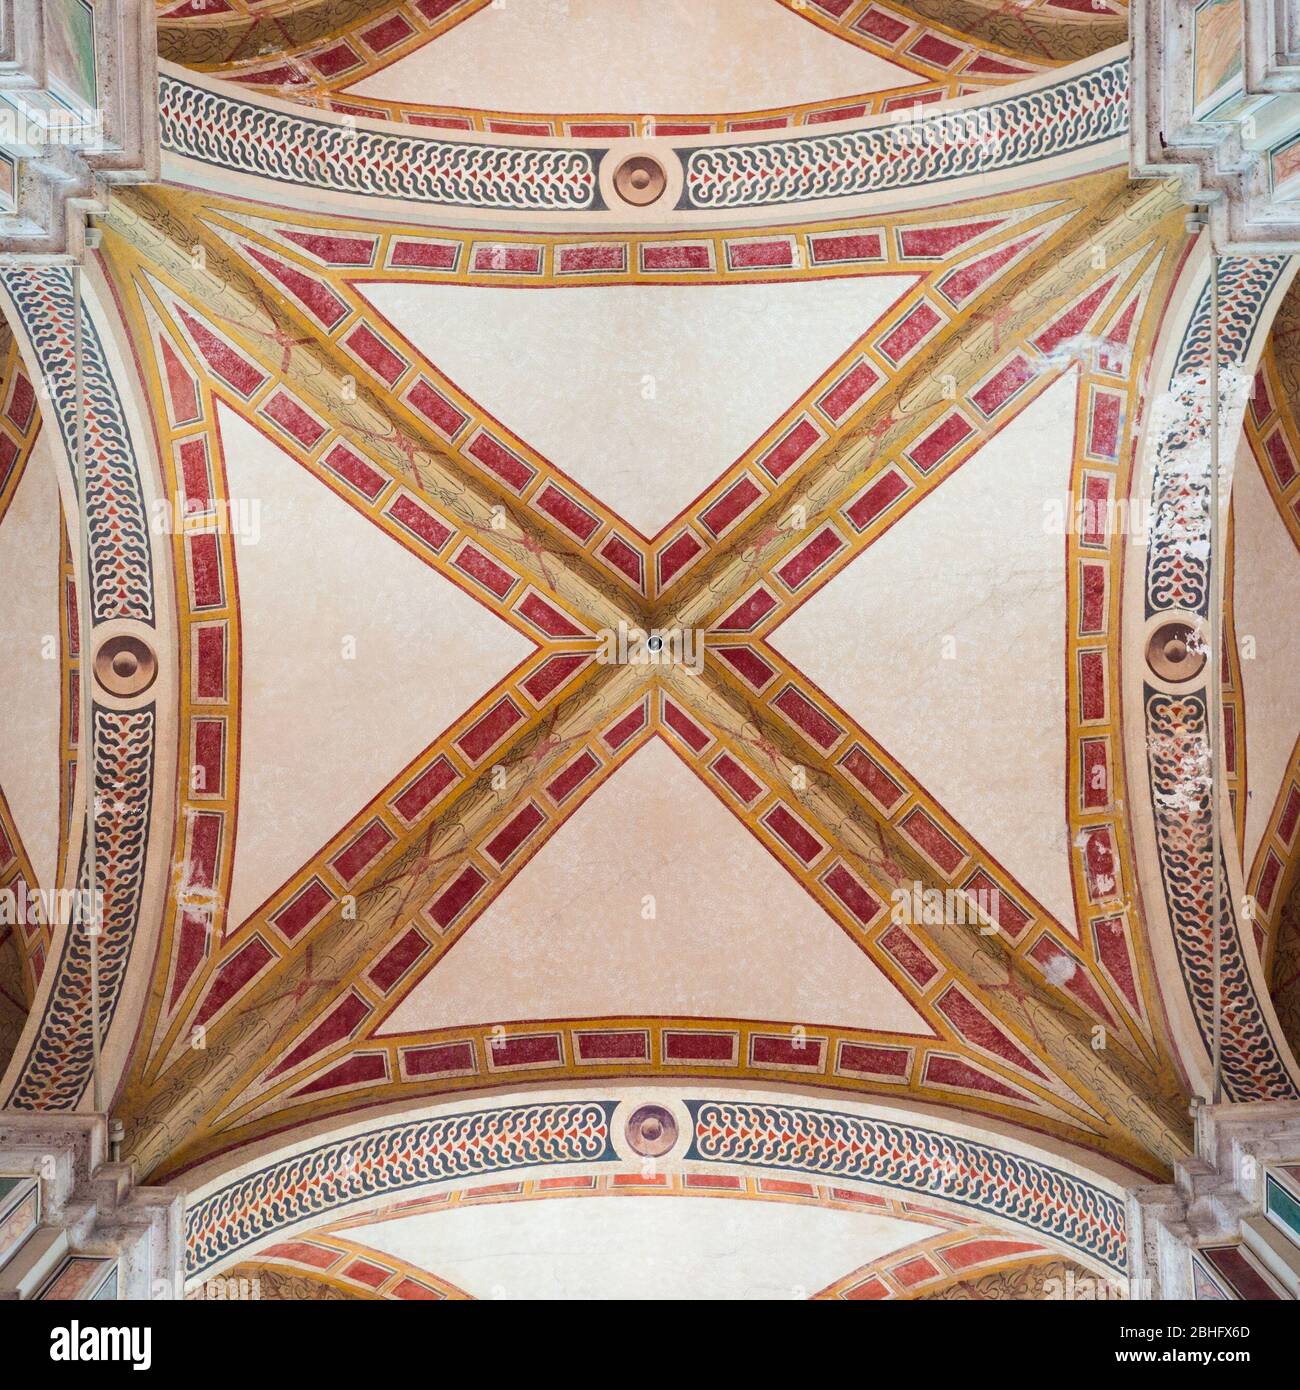 The cathedral of Santa Maria Assunta in Pienza. Detail of the decorated ceiling. Stock Photo